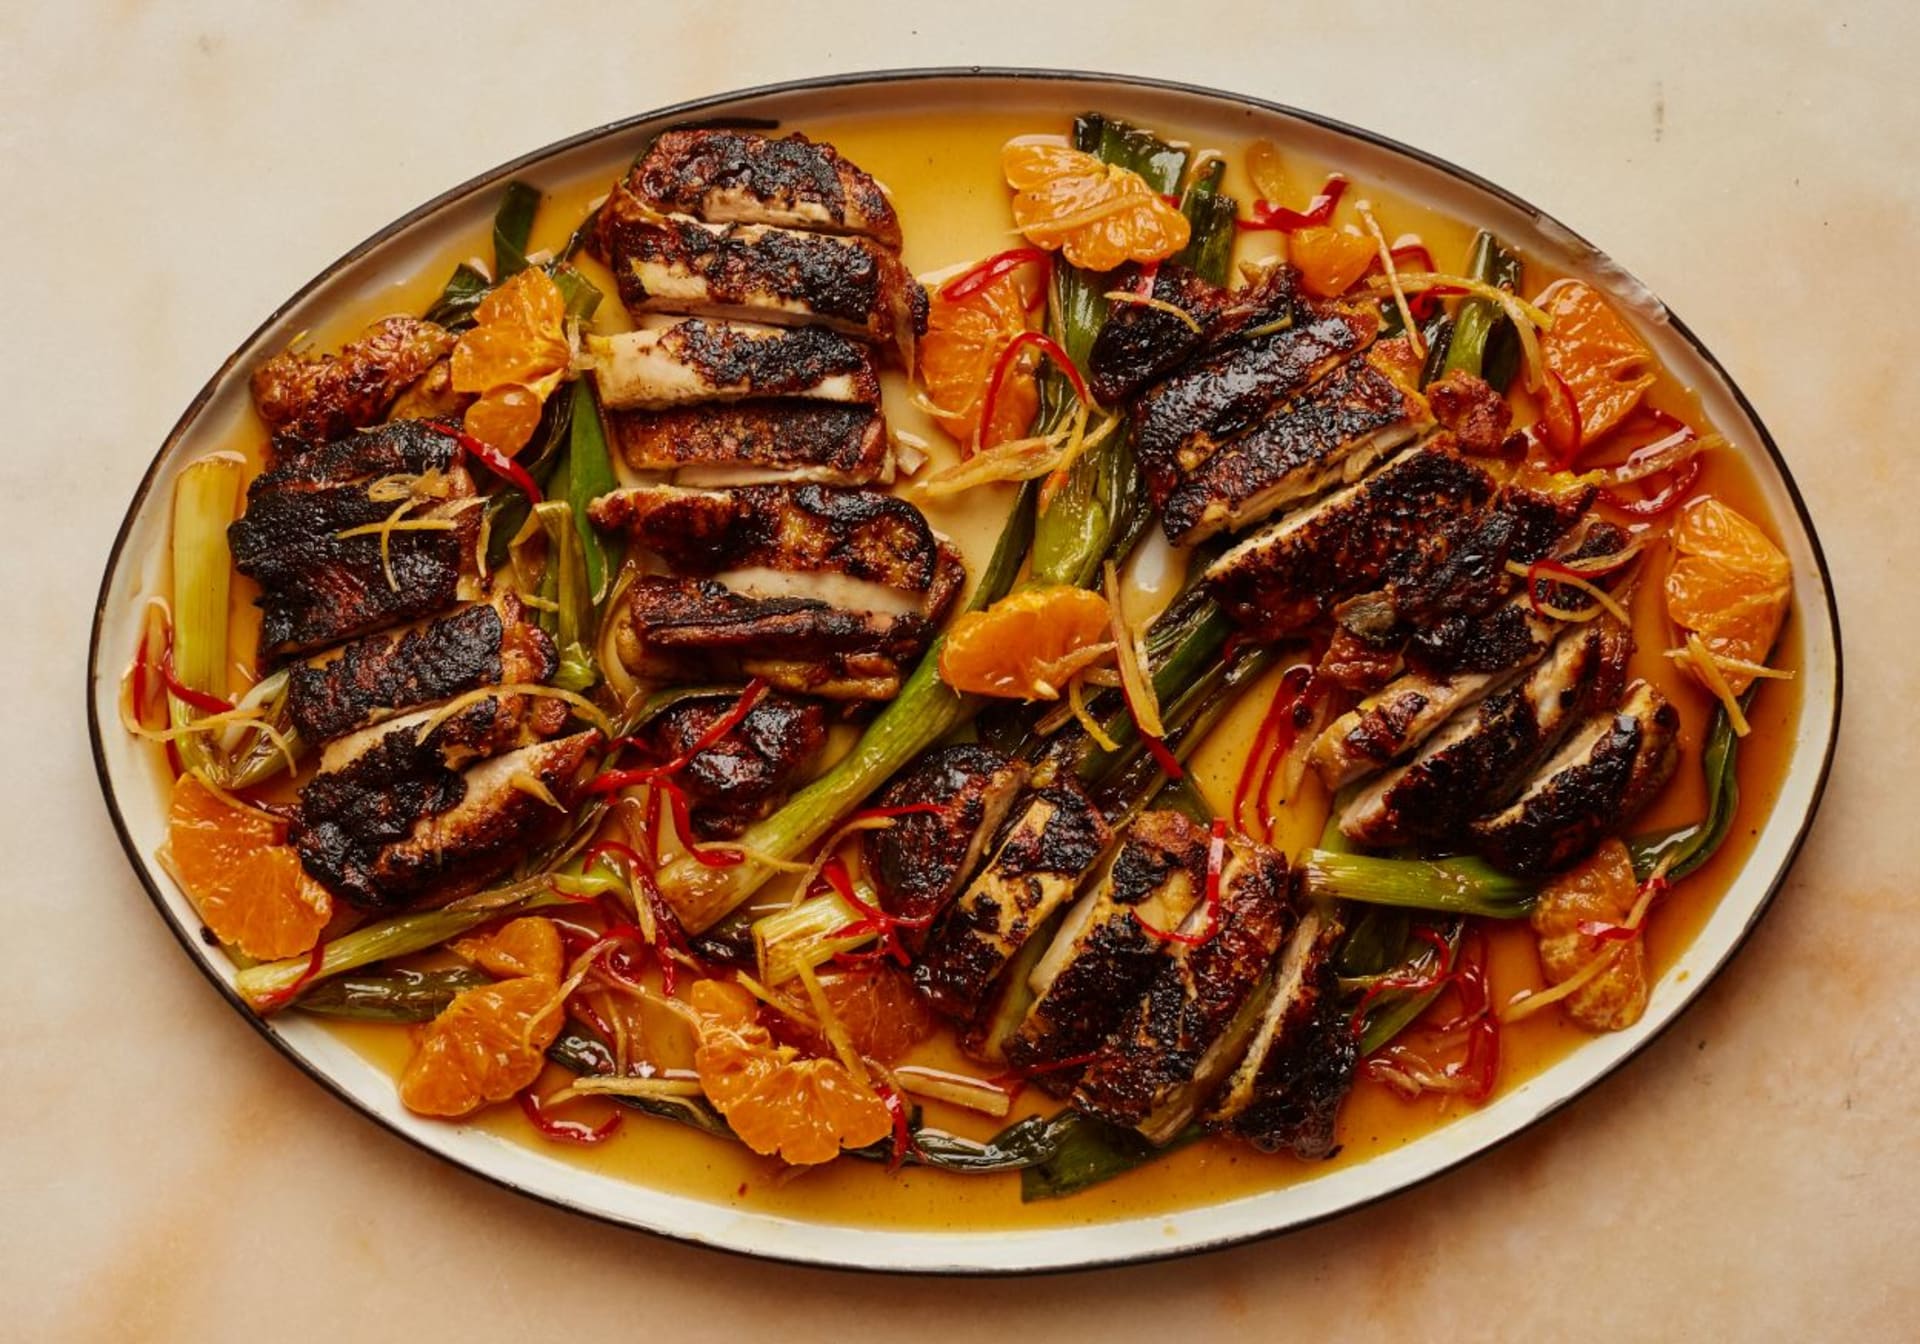 Tanned chicken with caramel dressing and clementine according to Ottolenghi